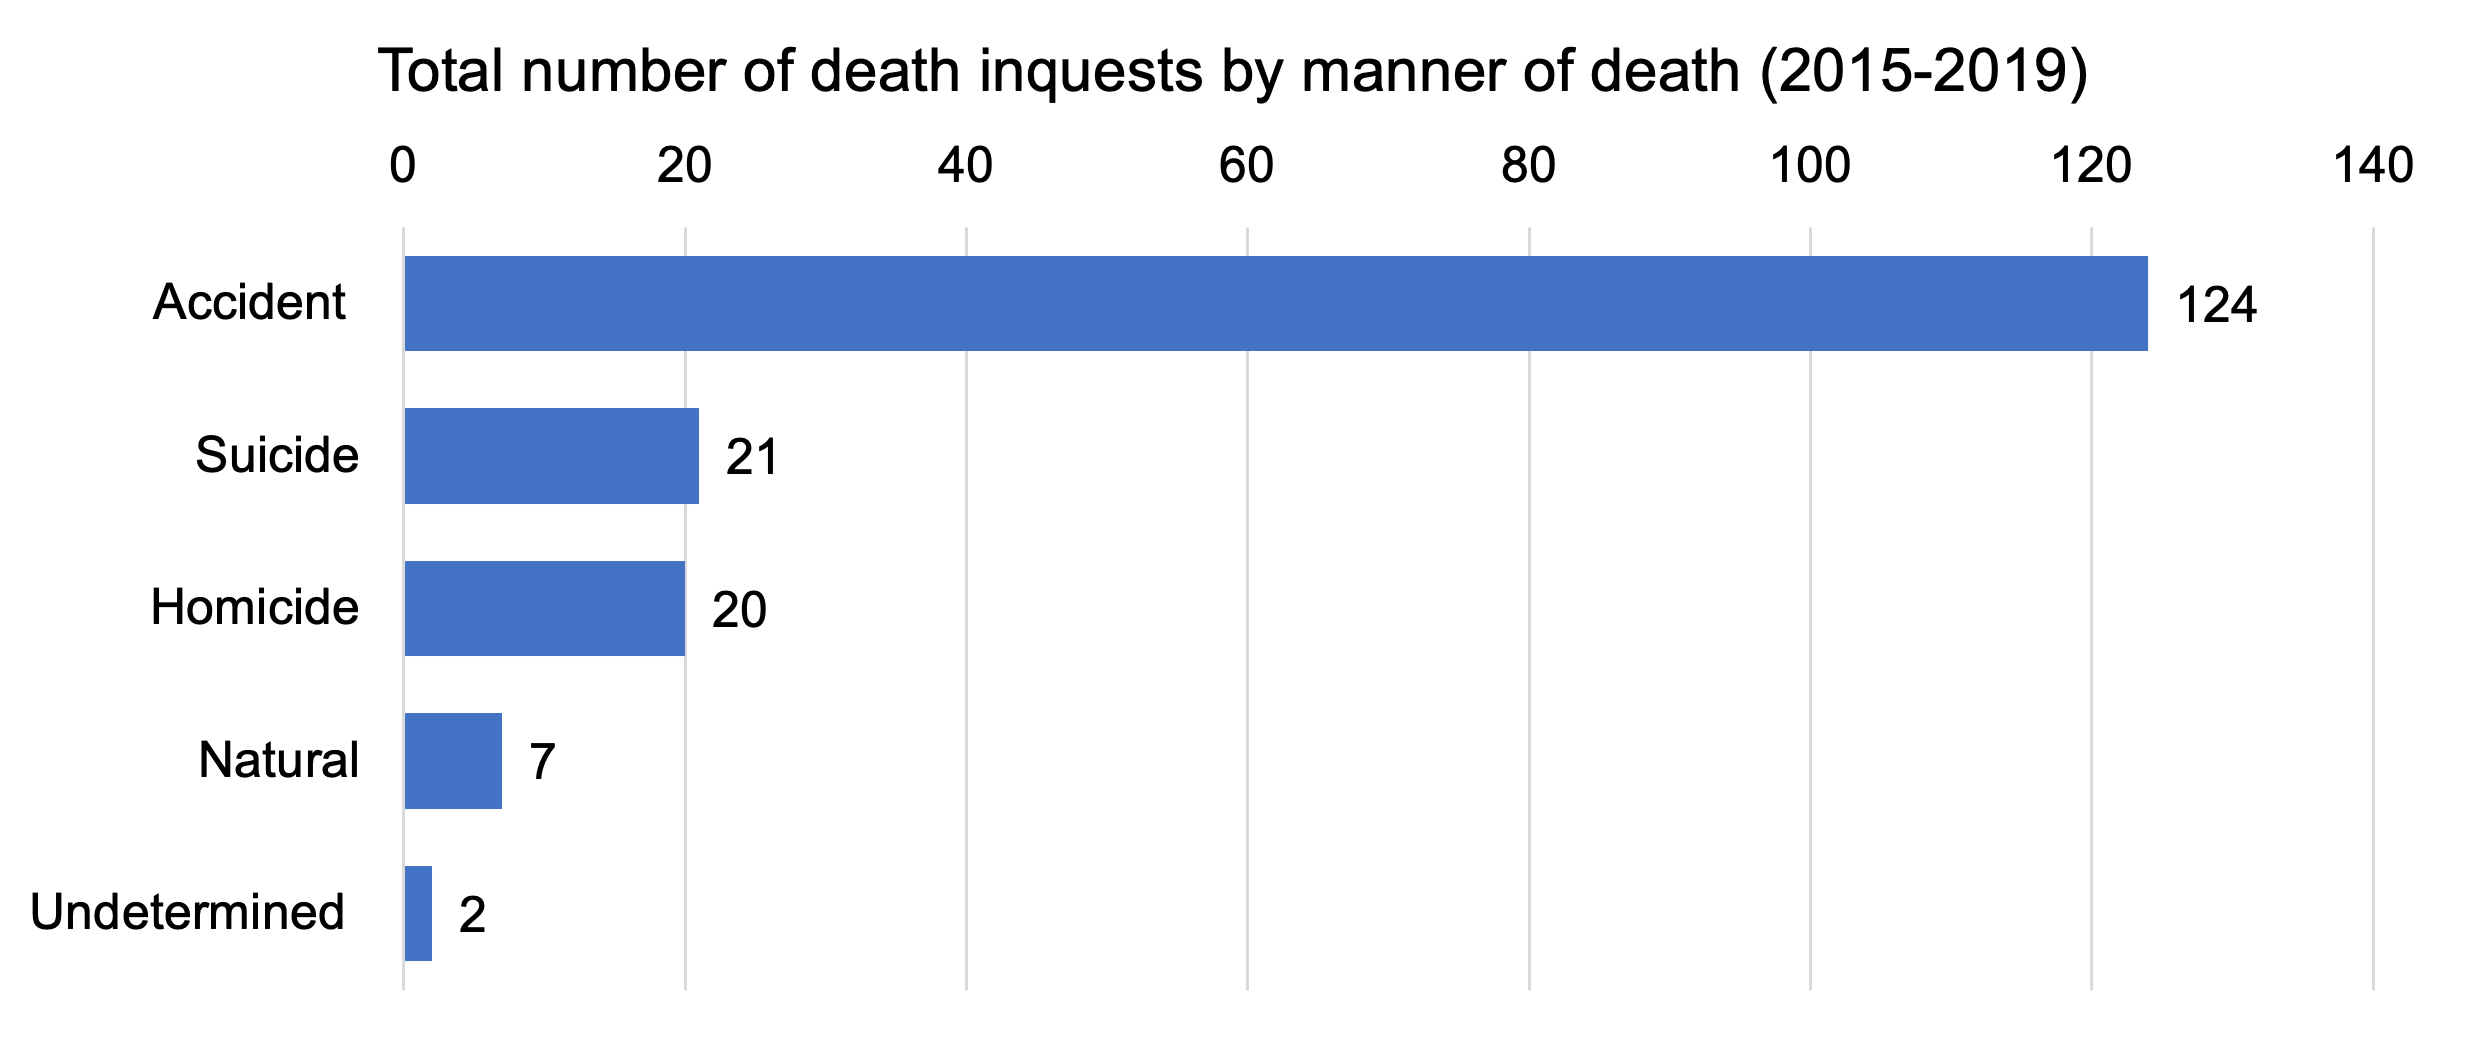 Total number of death inquests by manner of death: Graph showing total number of death inquests by manner of death from 2015 to 2019. There were 124 deaths as a result of an accident, 21 deaths a result of suicide, 20 deaths a result of homicide, 7 n